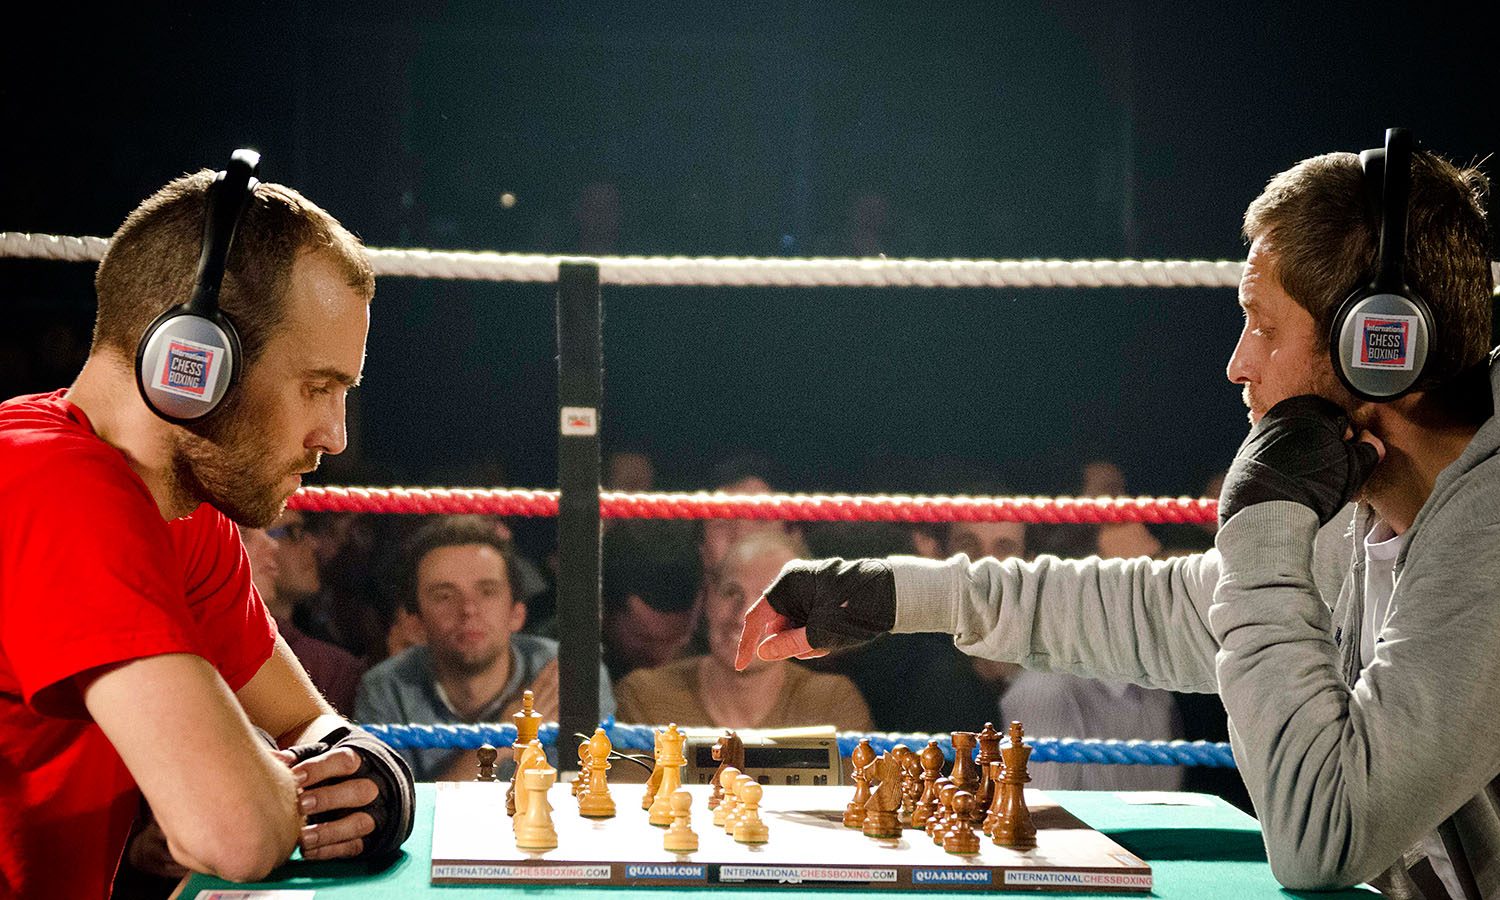 Chessboxing: The unlikely sporting combination with a worldwide